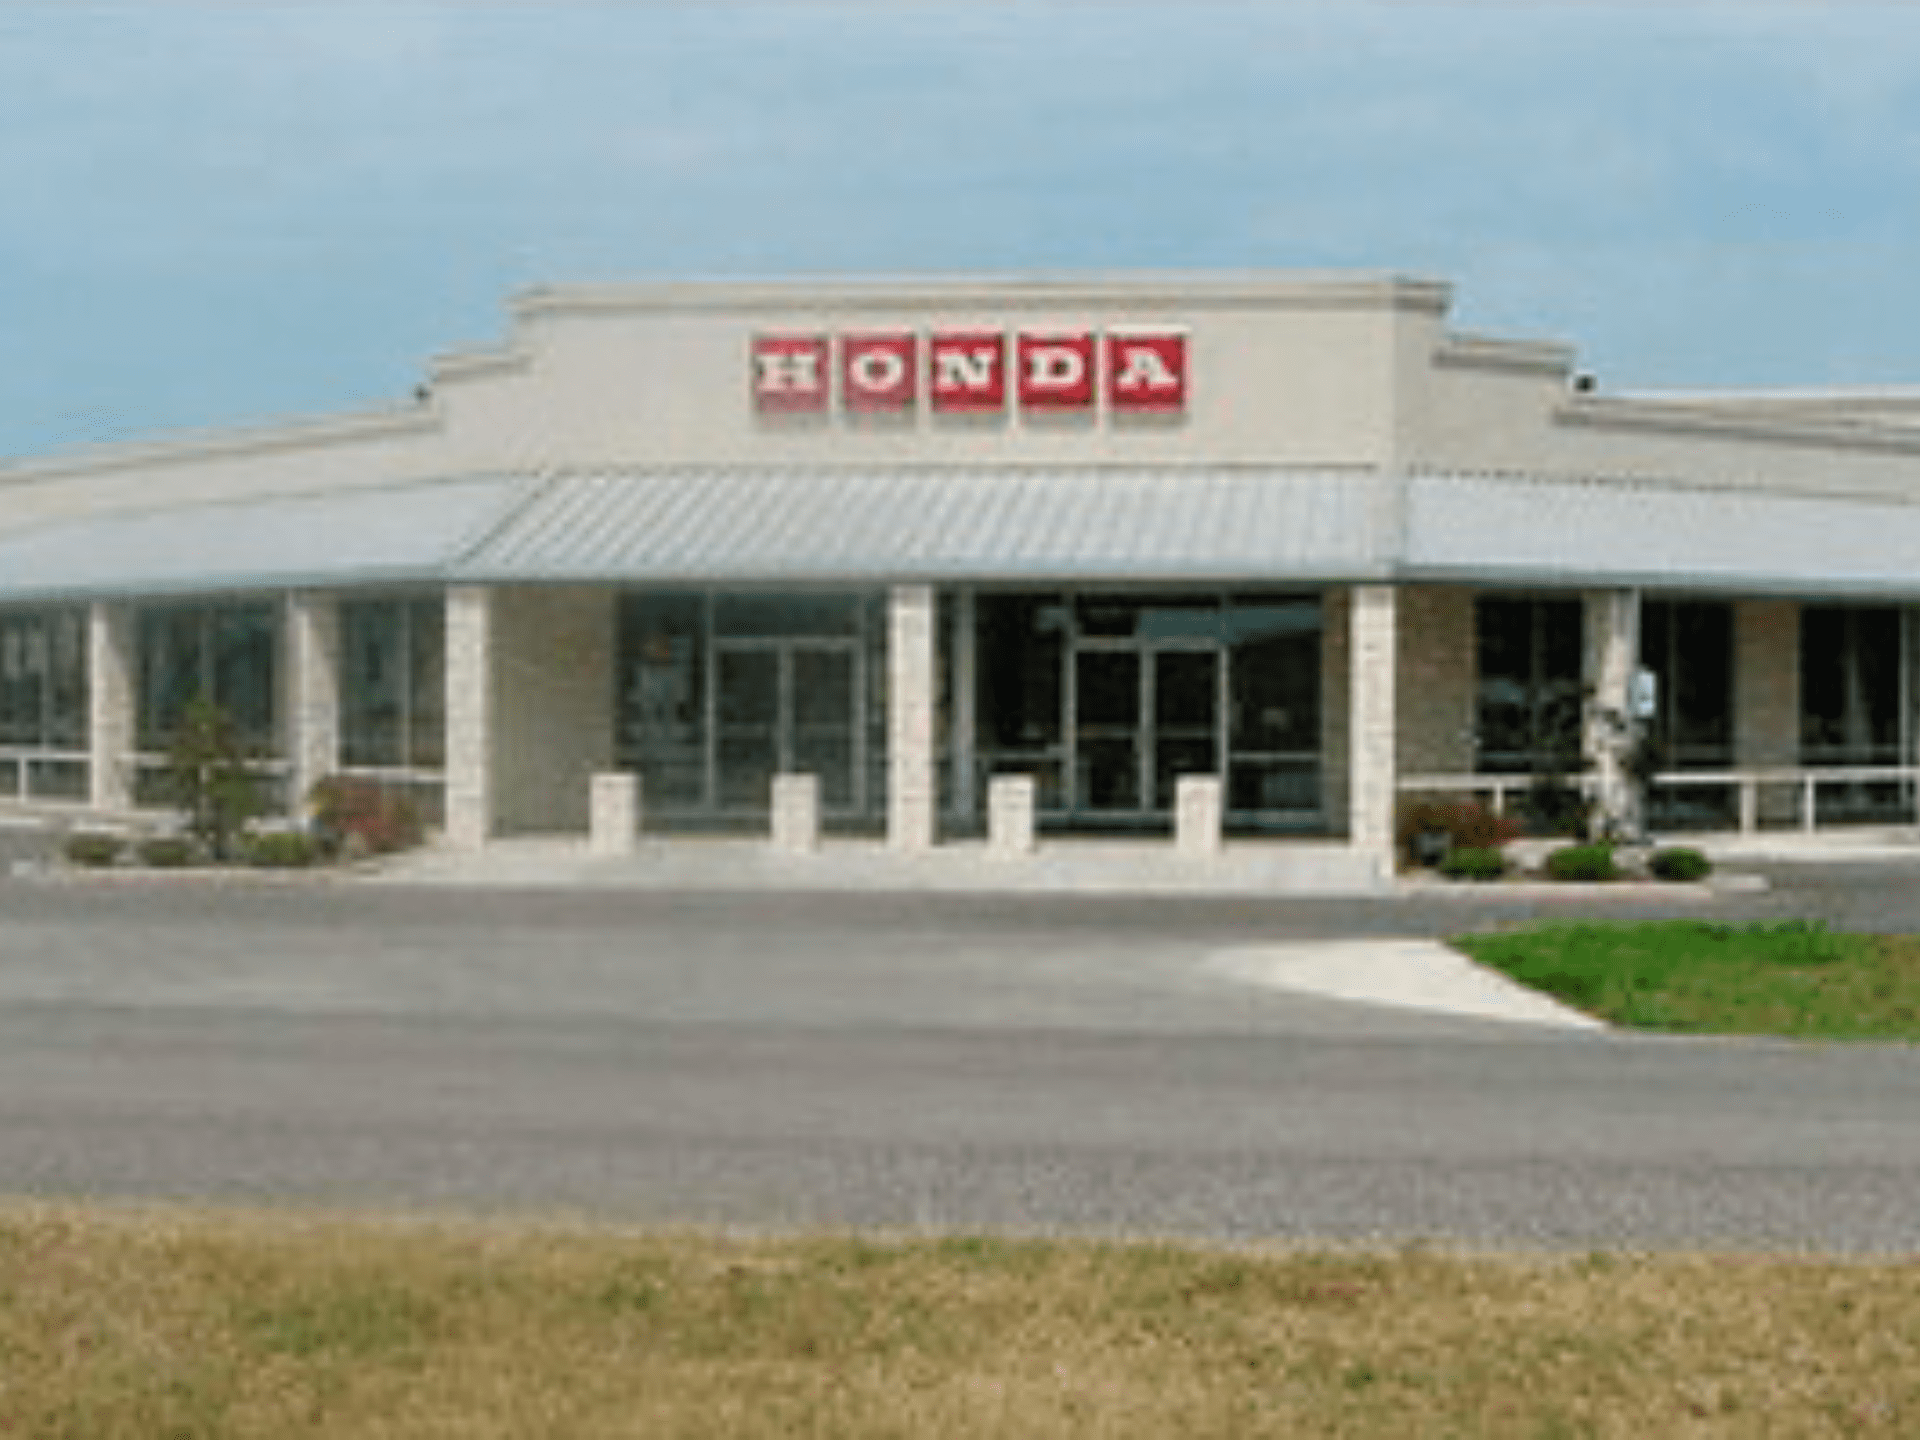 a building with a Honda sign on the front